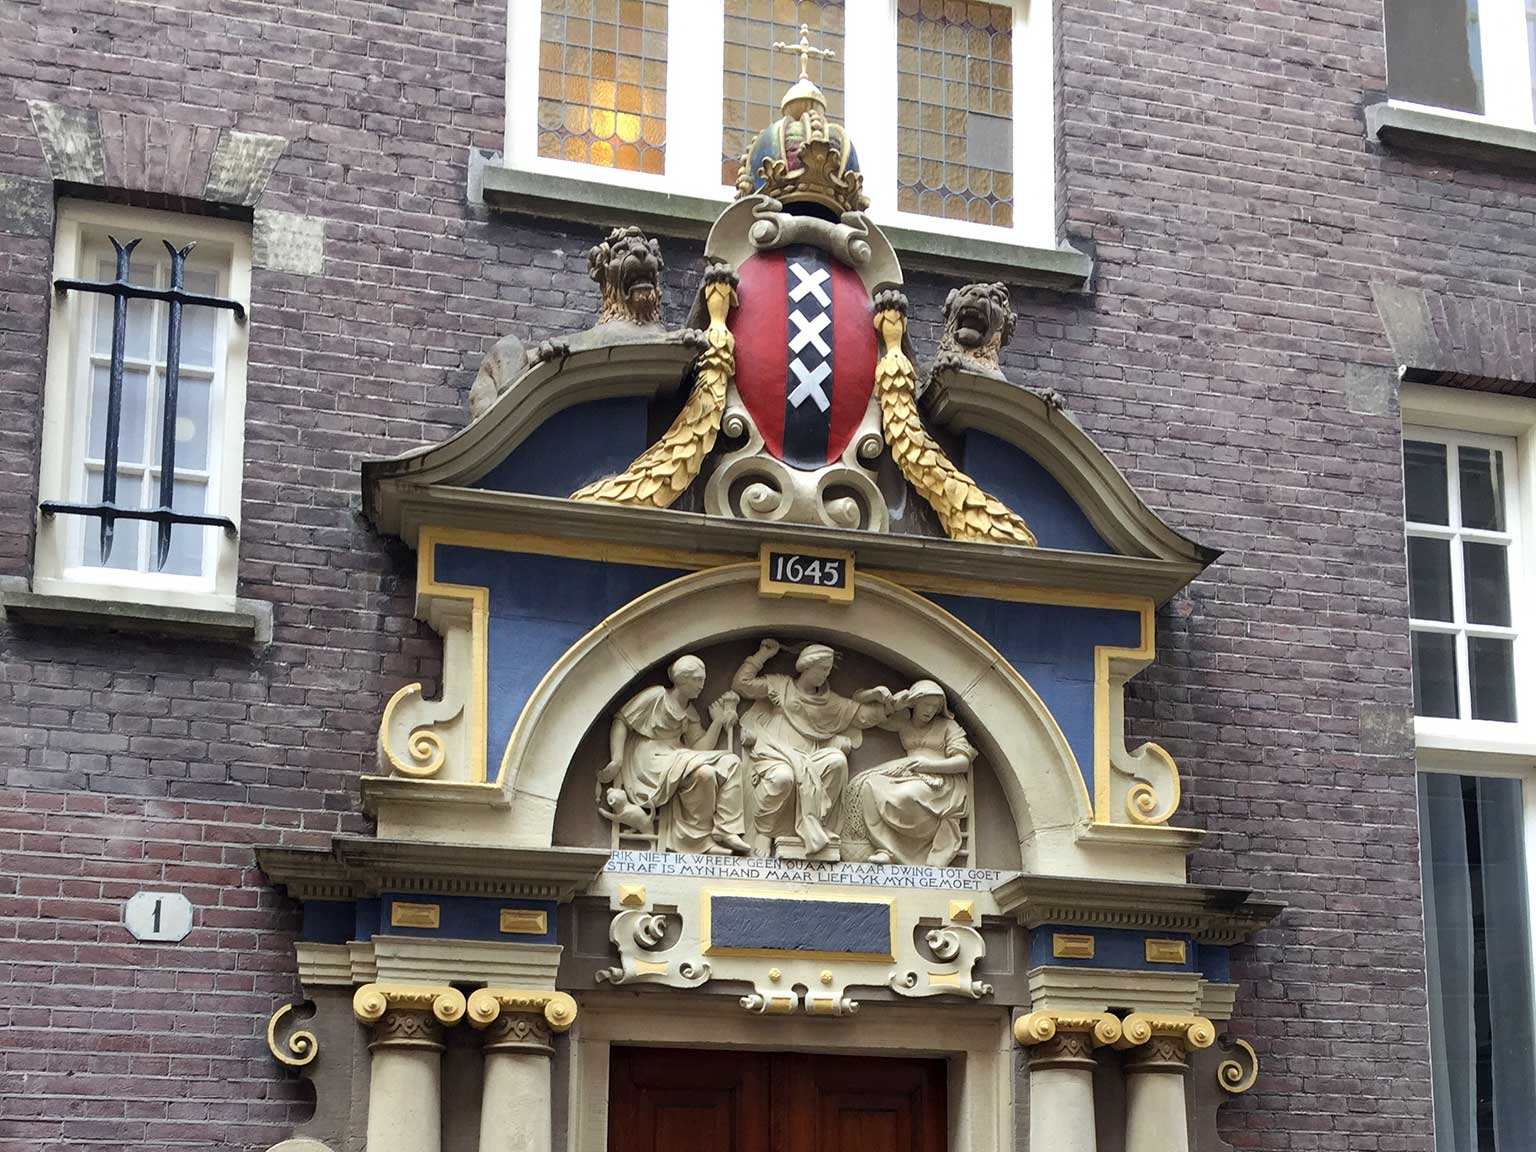 Imperial crown above the Amsterdam seal at the Spinhuissteeg, Amsterdam